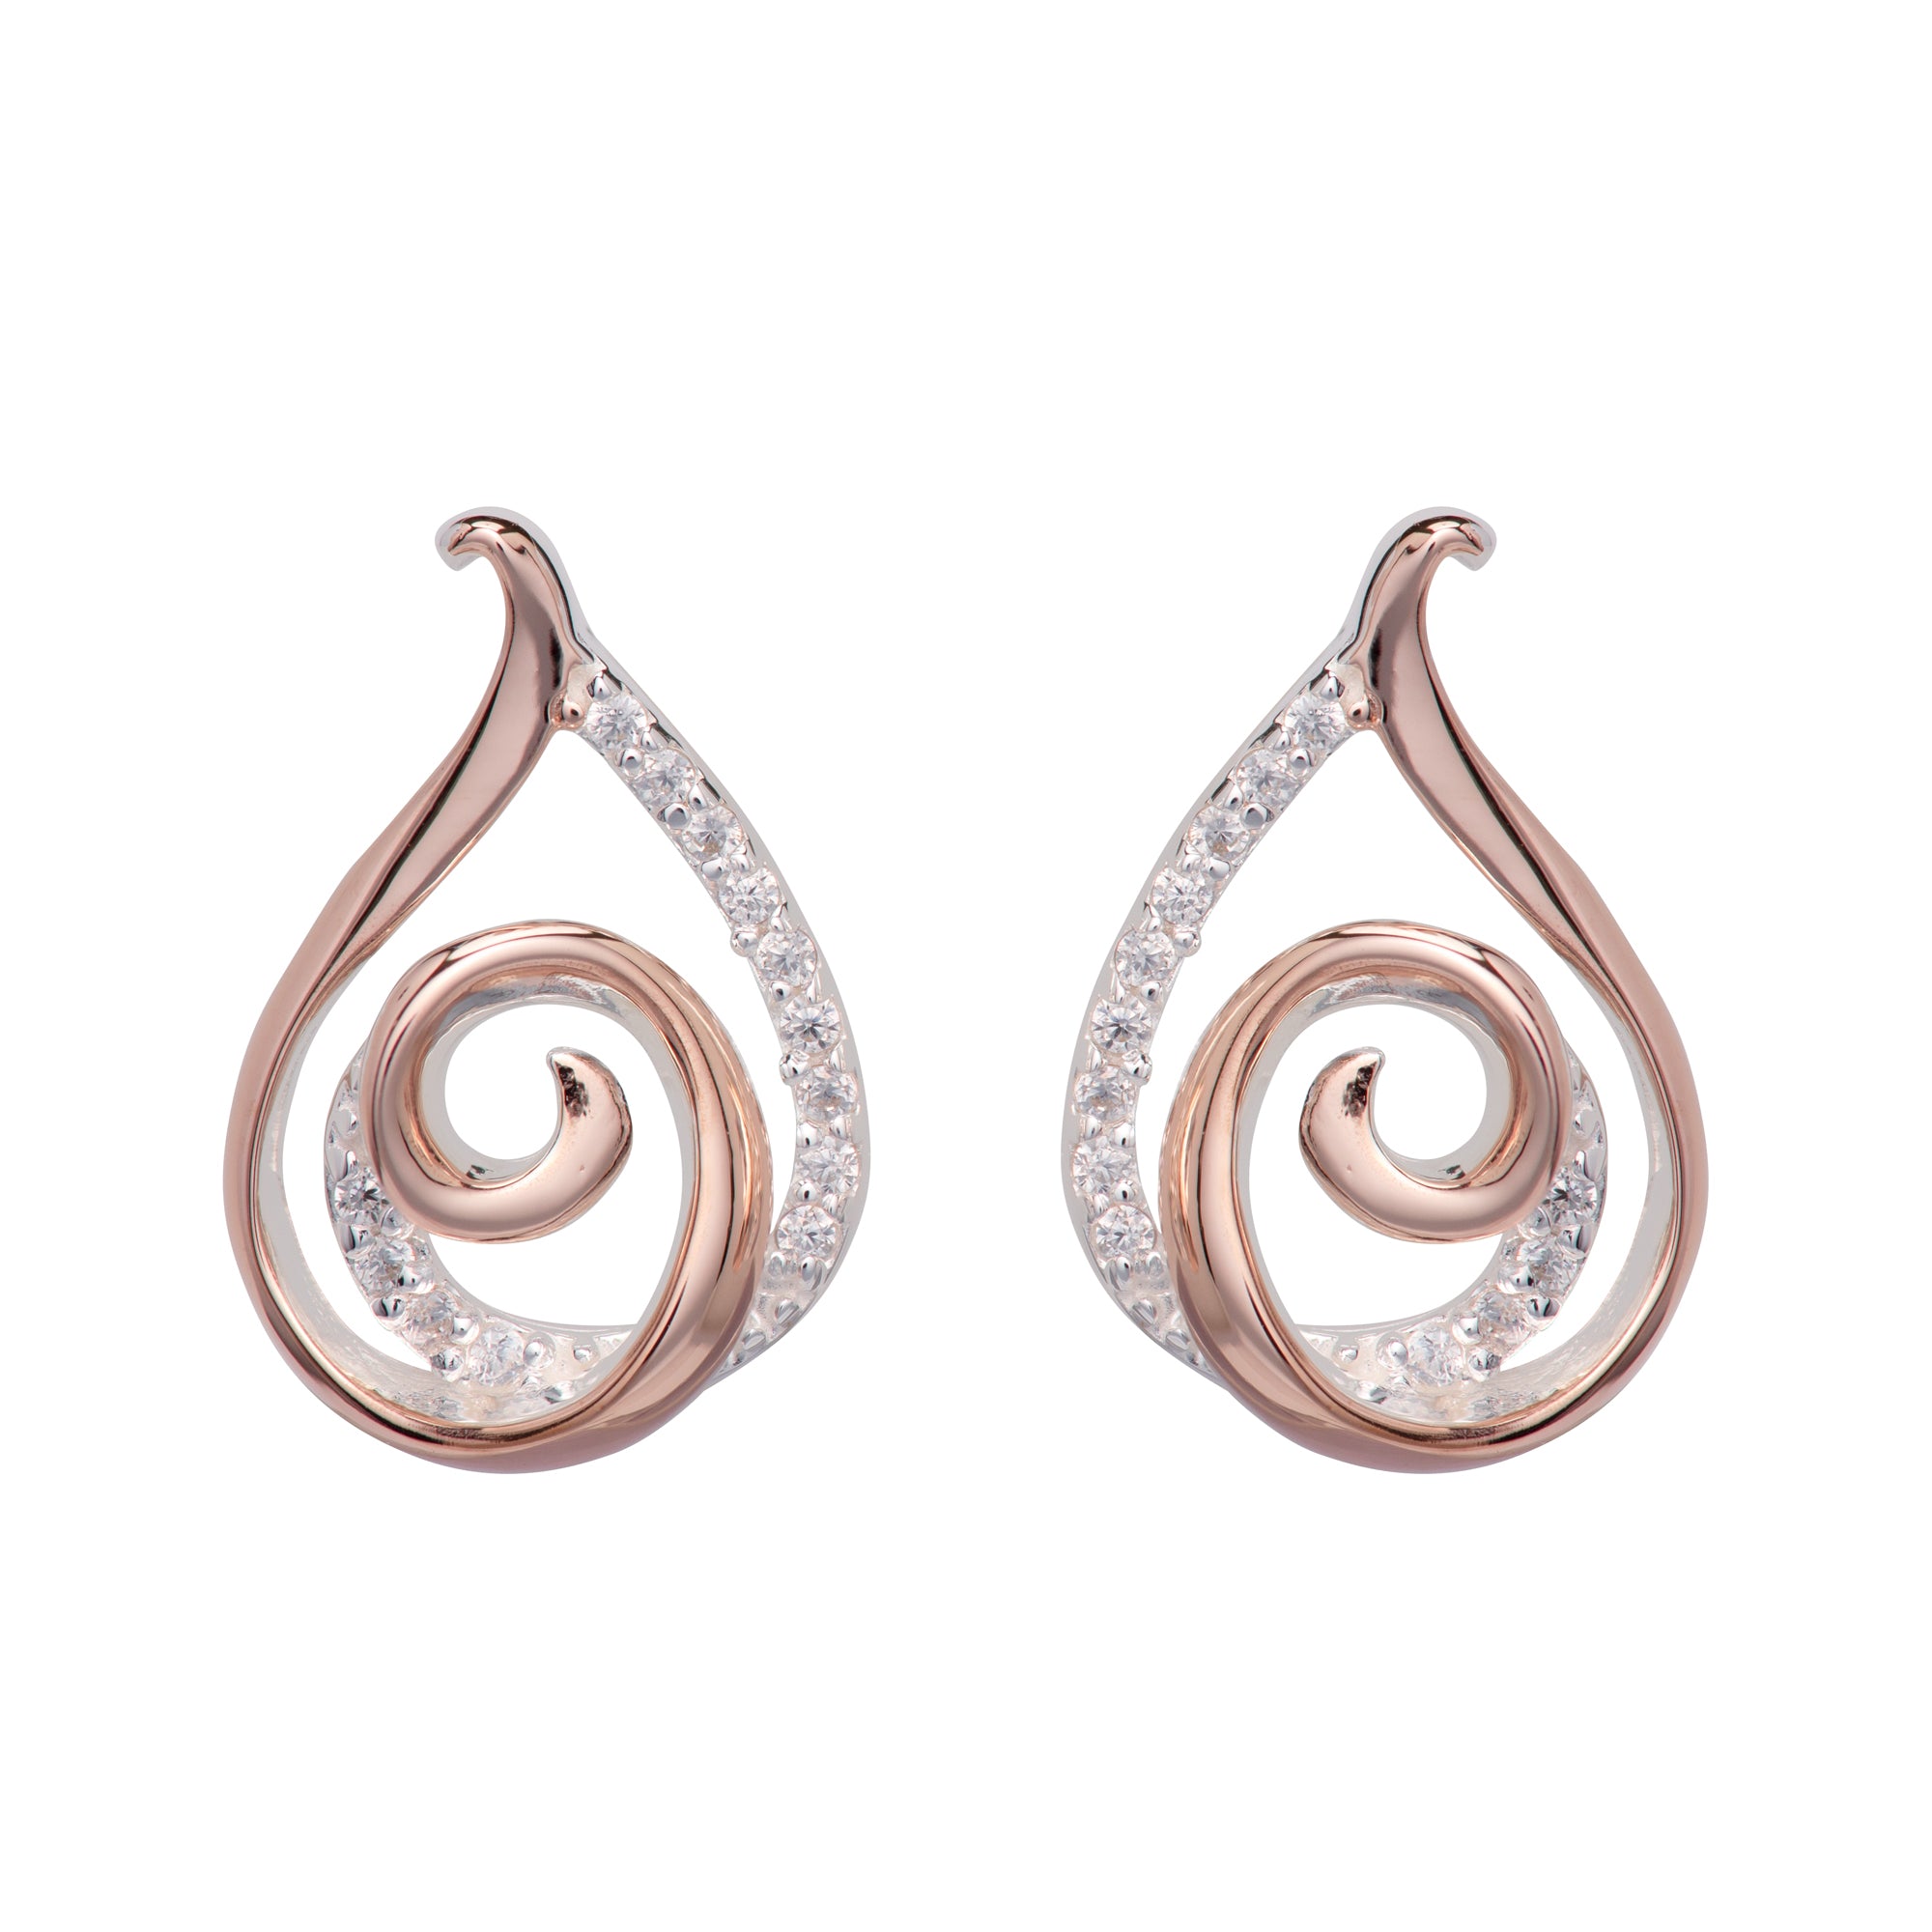 Unique & Co Silver, Rose Gold Plated and CZ Swirl Stud Earrings